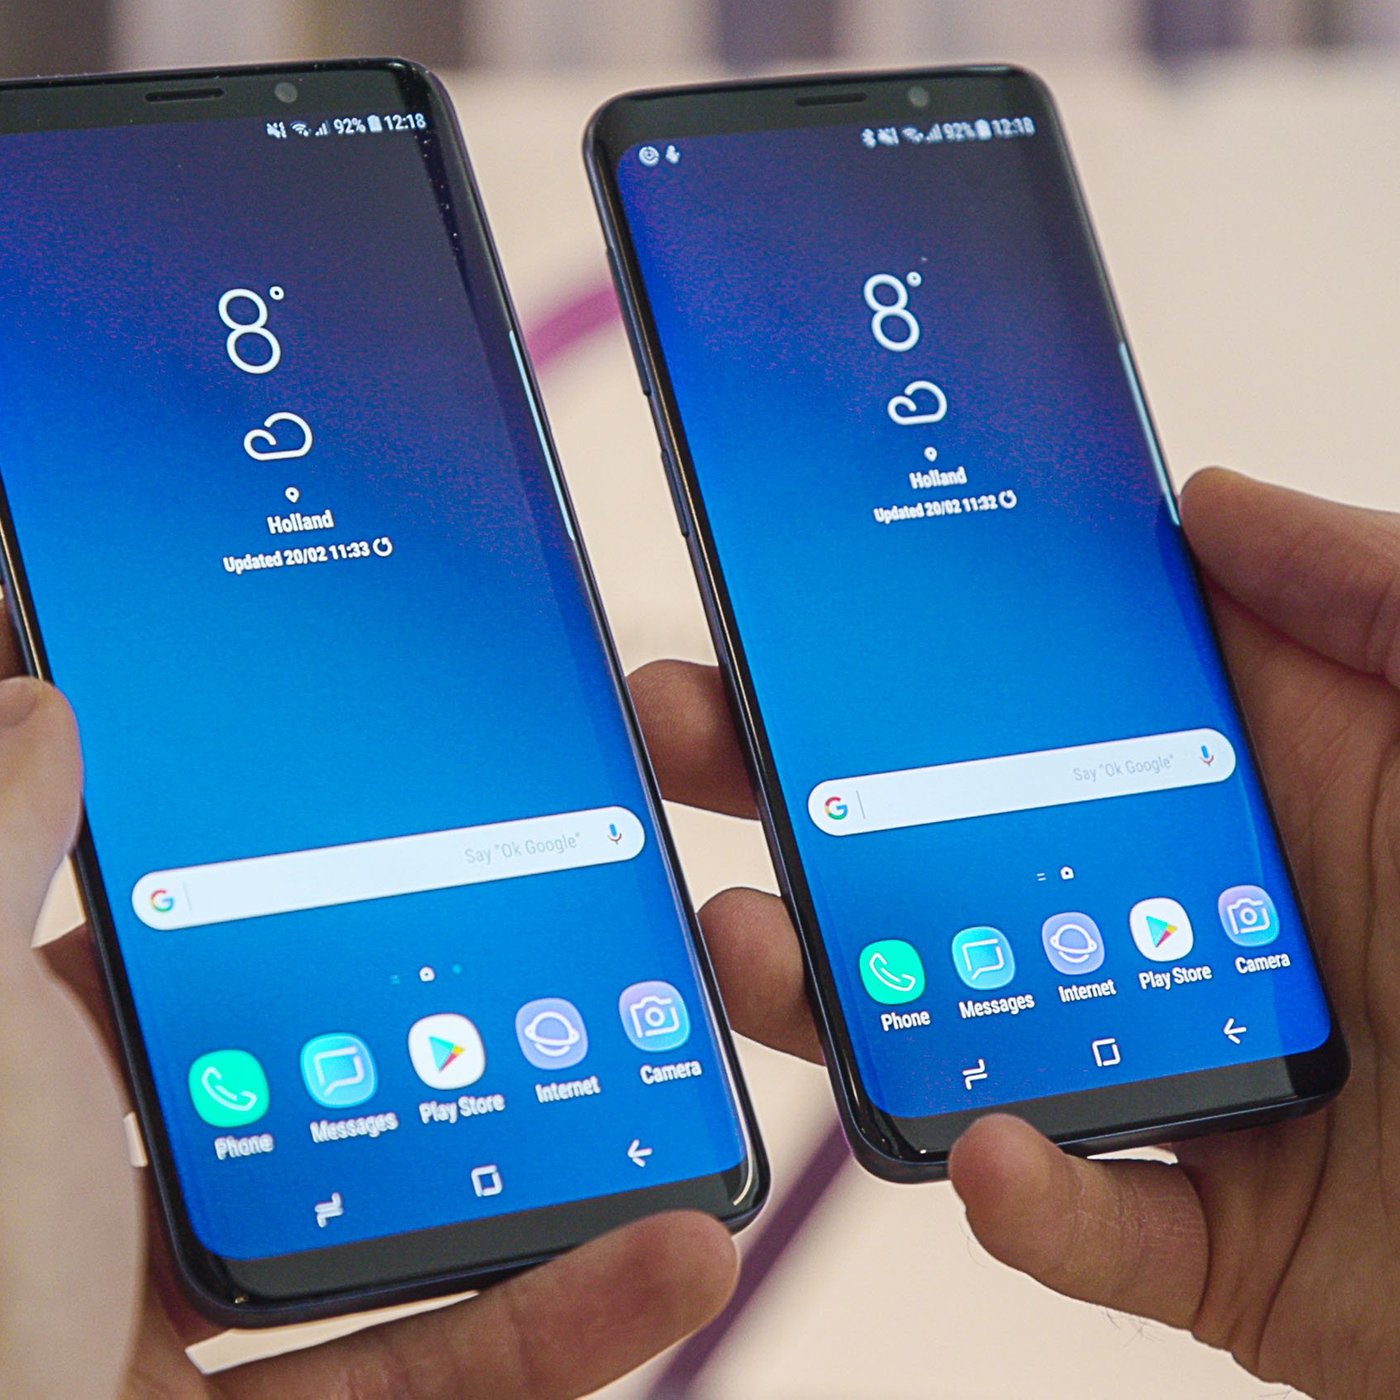 Samsung brings new messaging feature, improved AR Emoji to Galaxy S9 lineup﻿